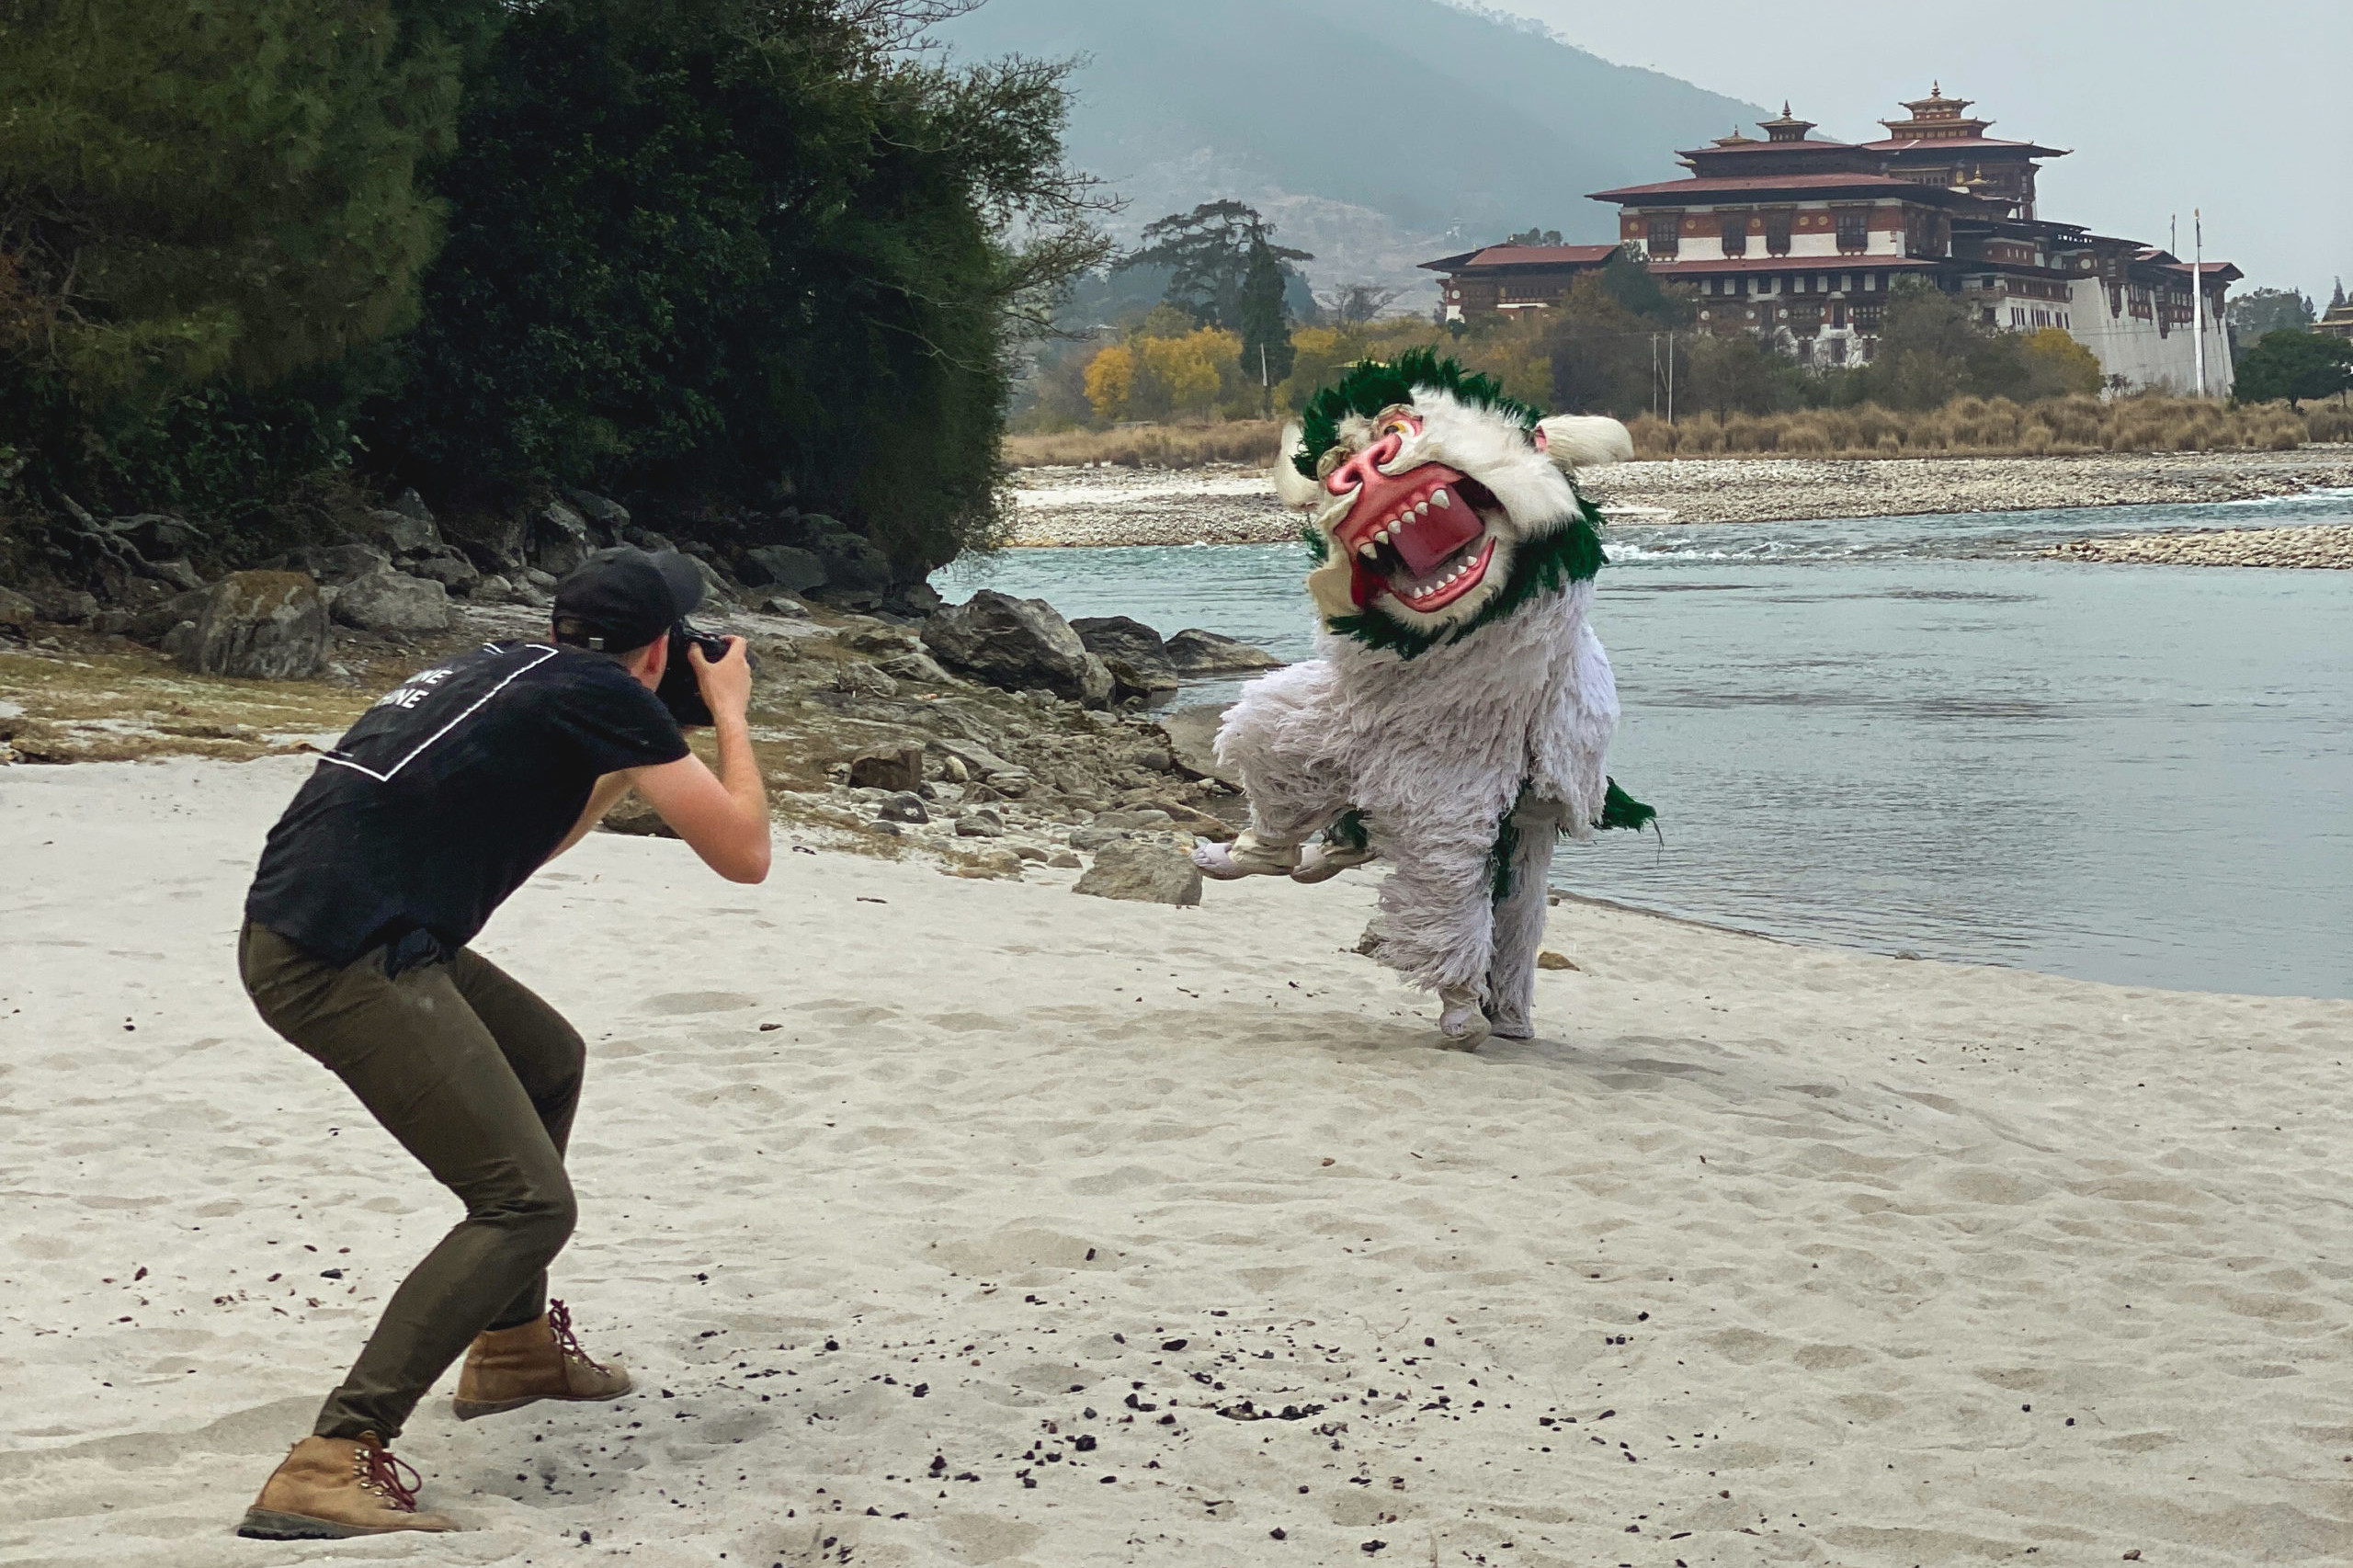 Andrew Studer photographs the traditional Bhutanese dancers in front of Punakha Dzong in Bhutan.